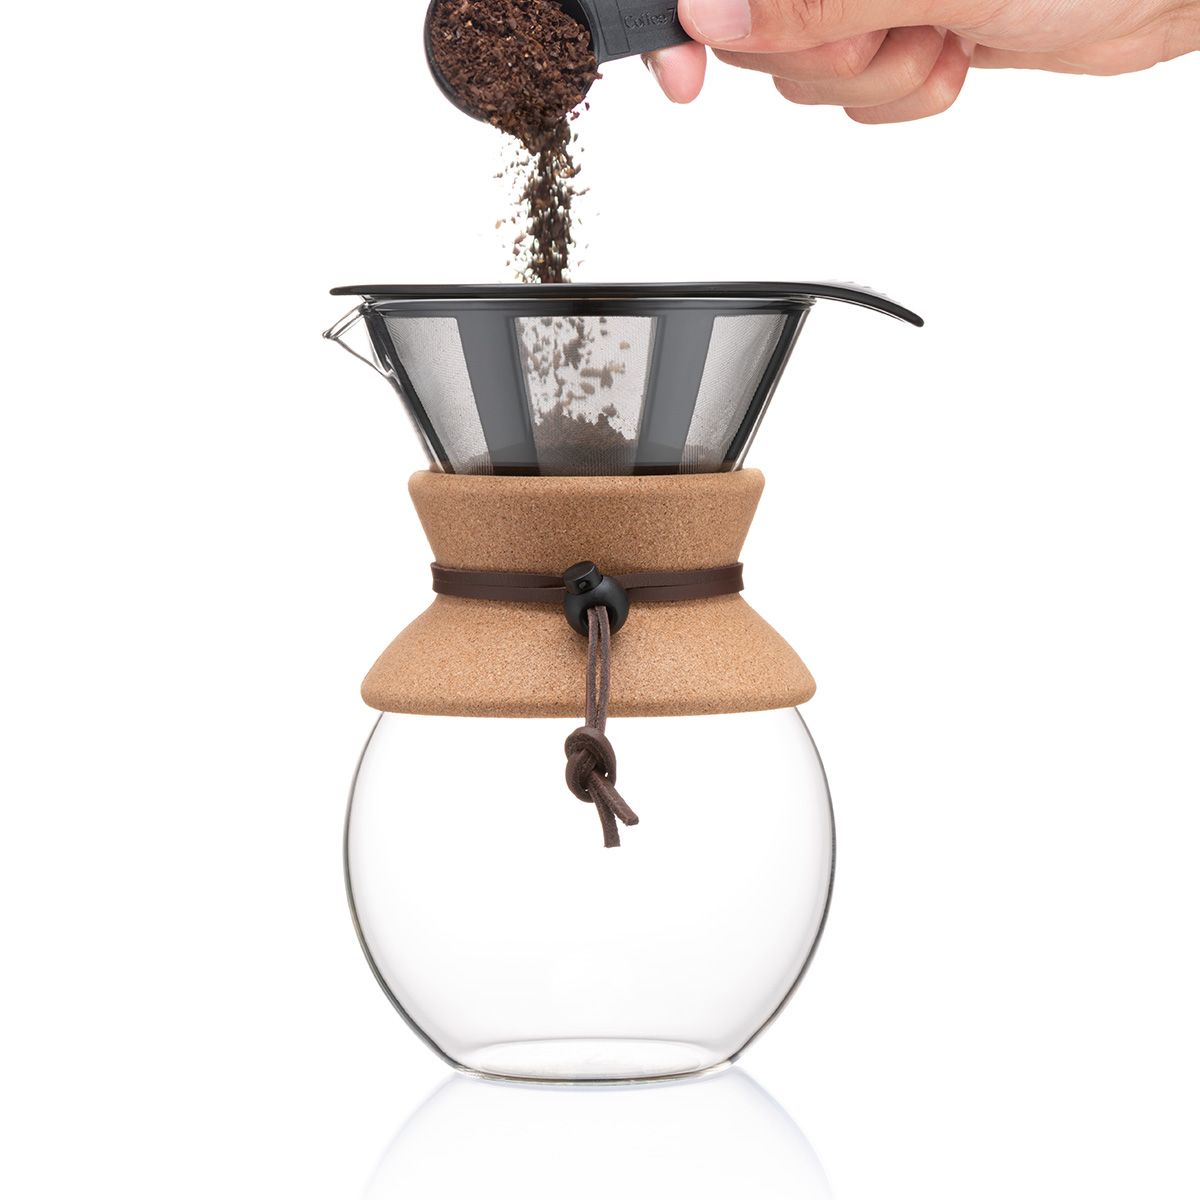 Filter Coffee Maker POUR OVER 1.0 L